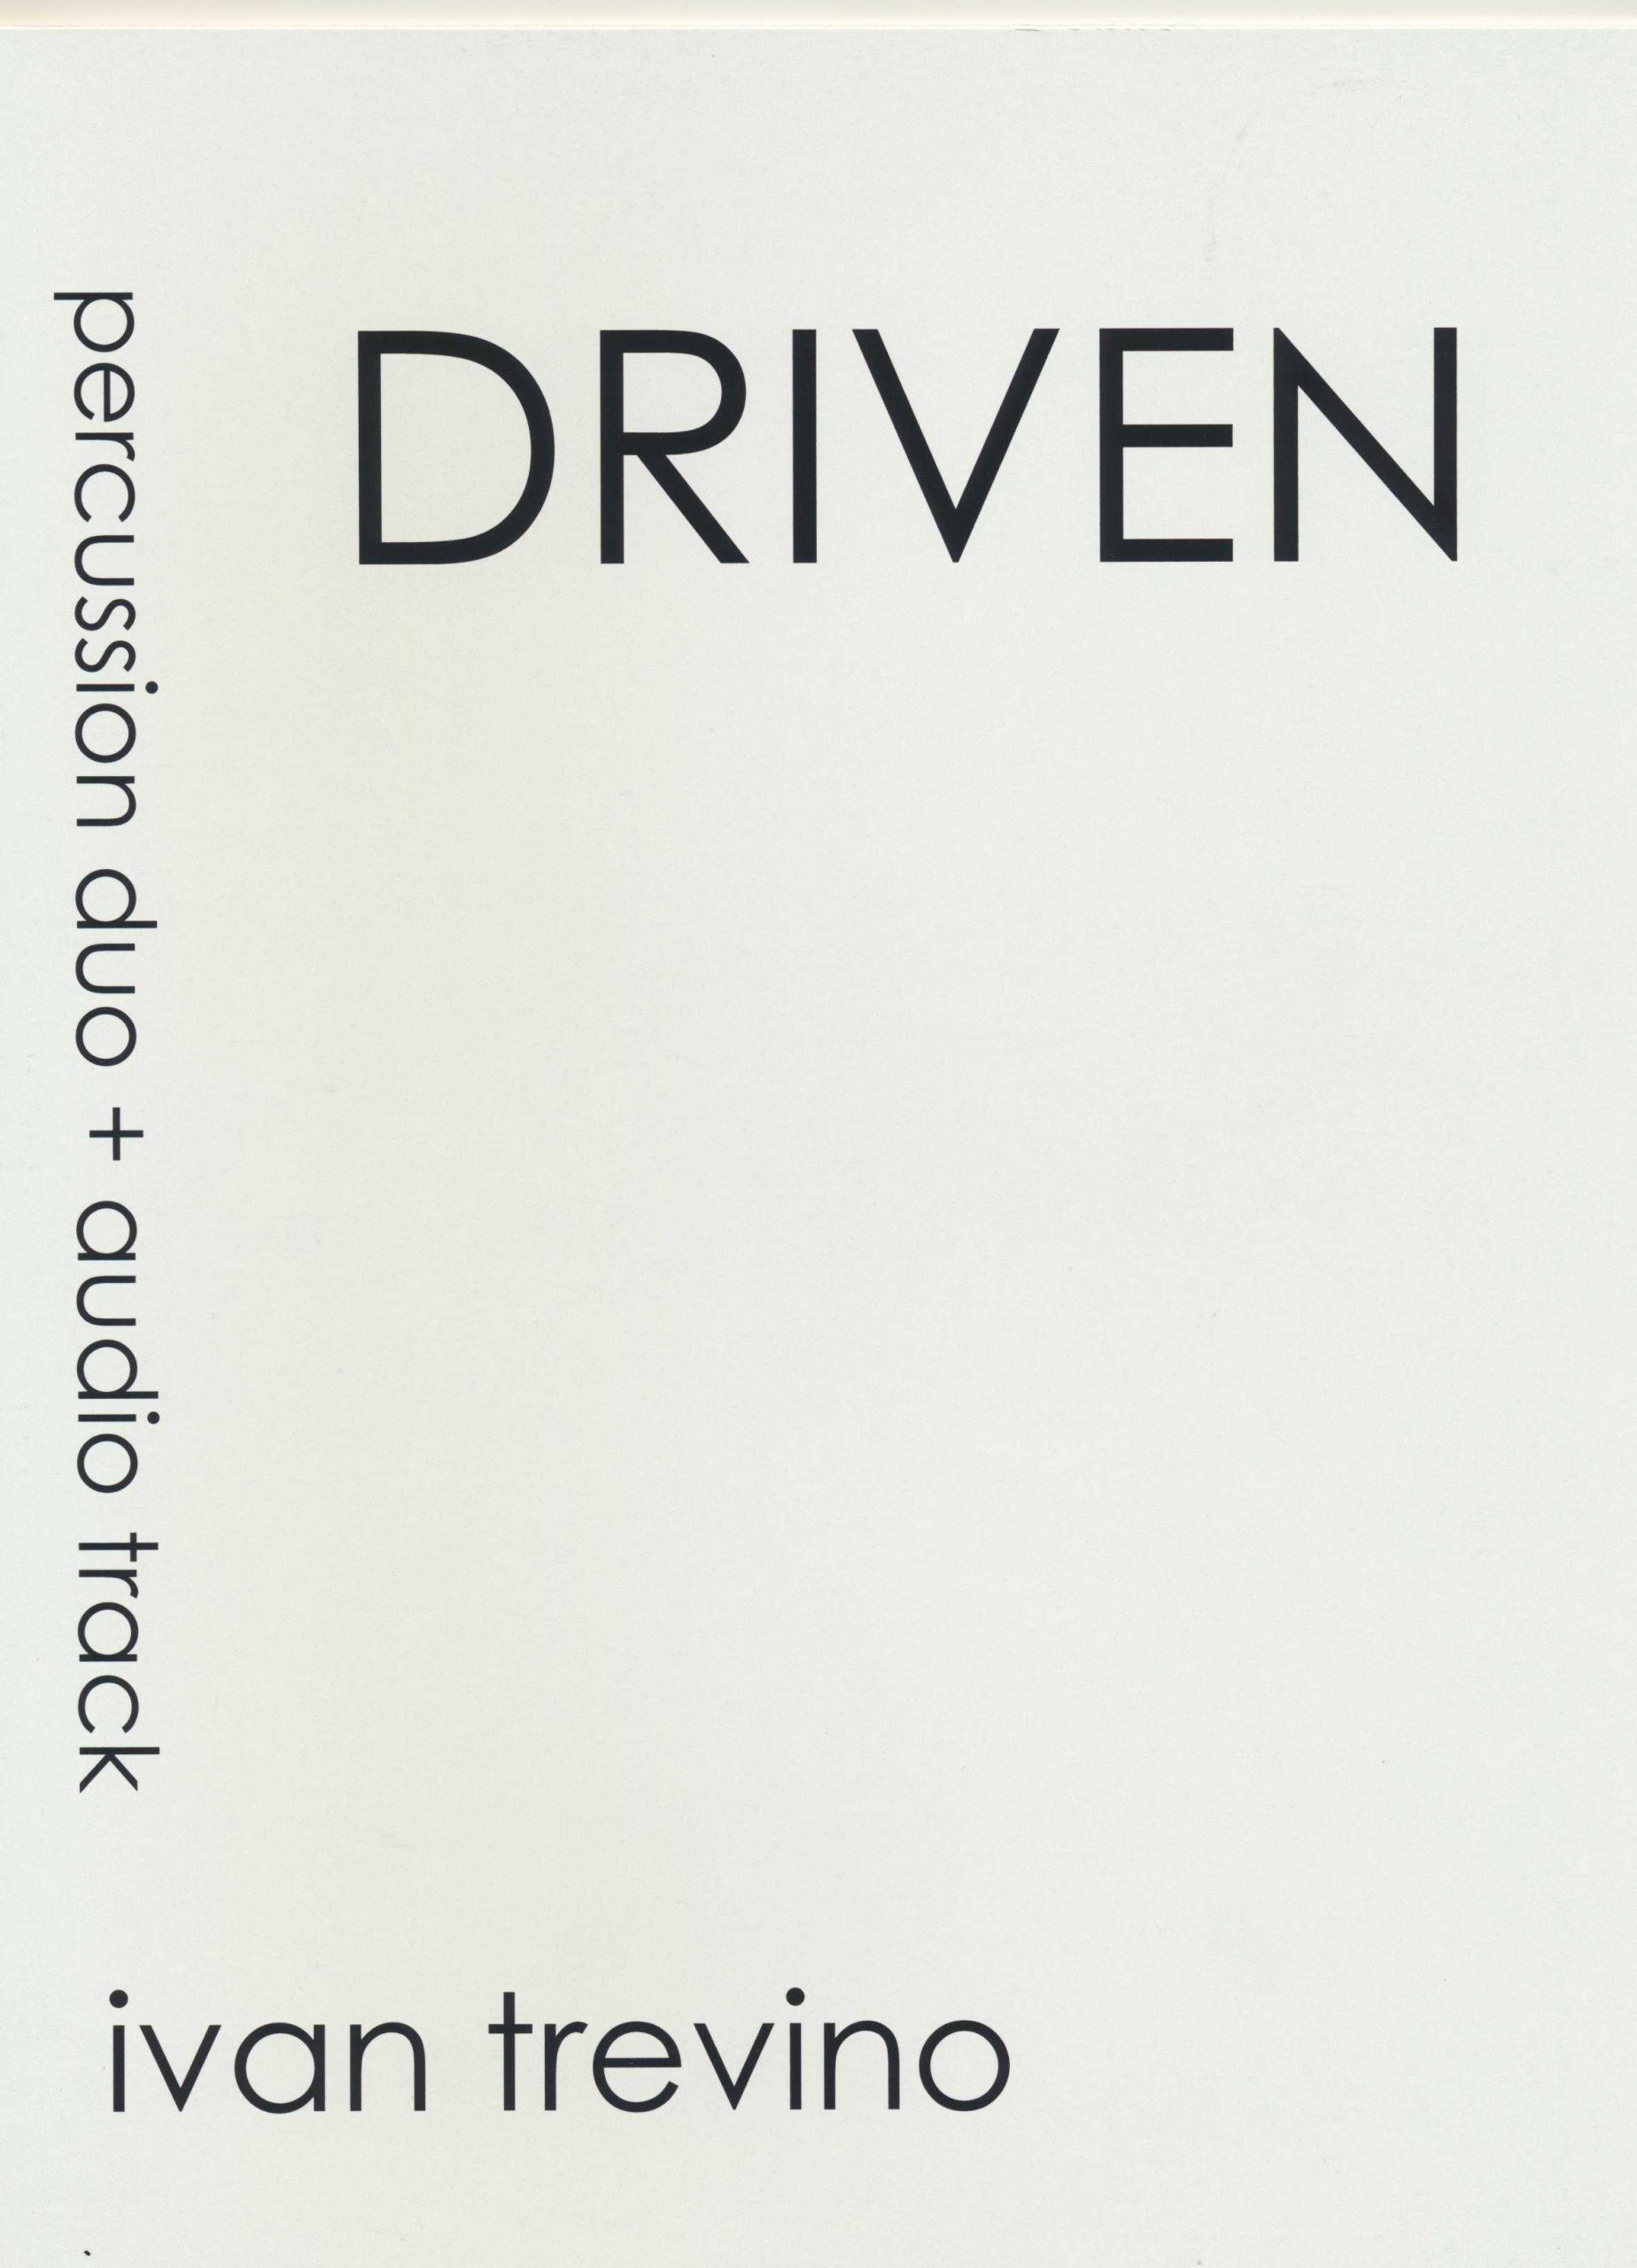 Driven by Ivan Trevino